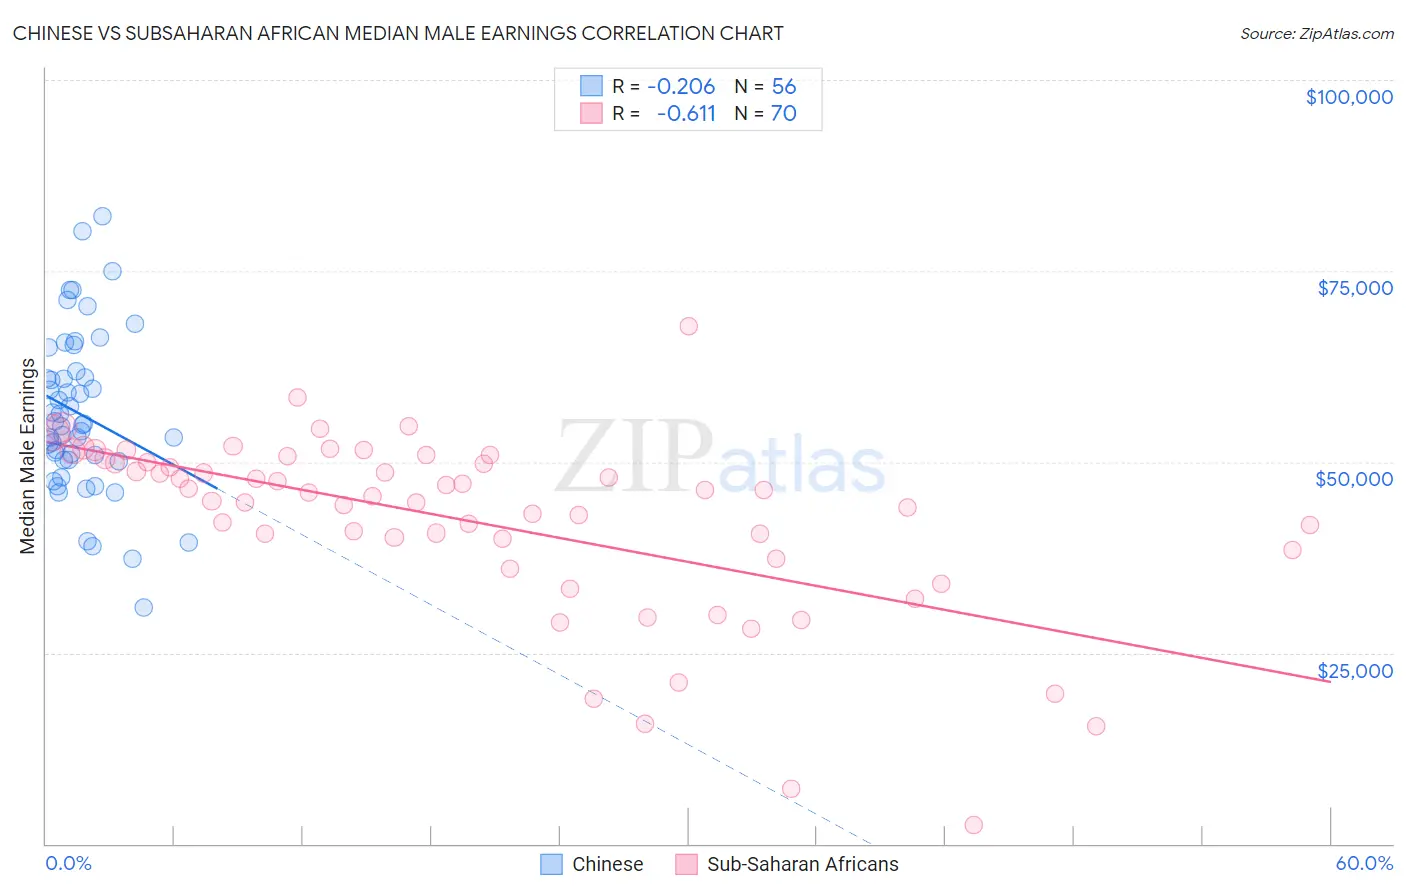 Chinese vs Subsaharan African Median Male Earnings